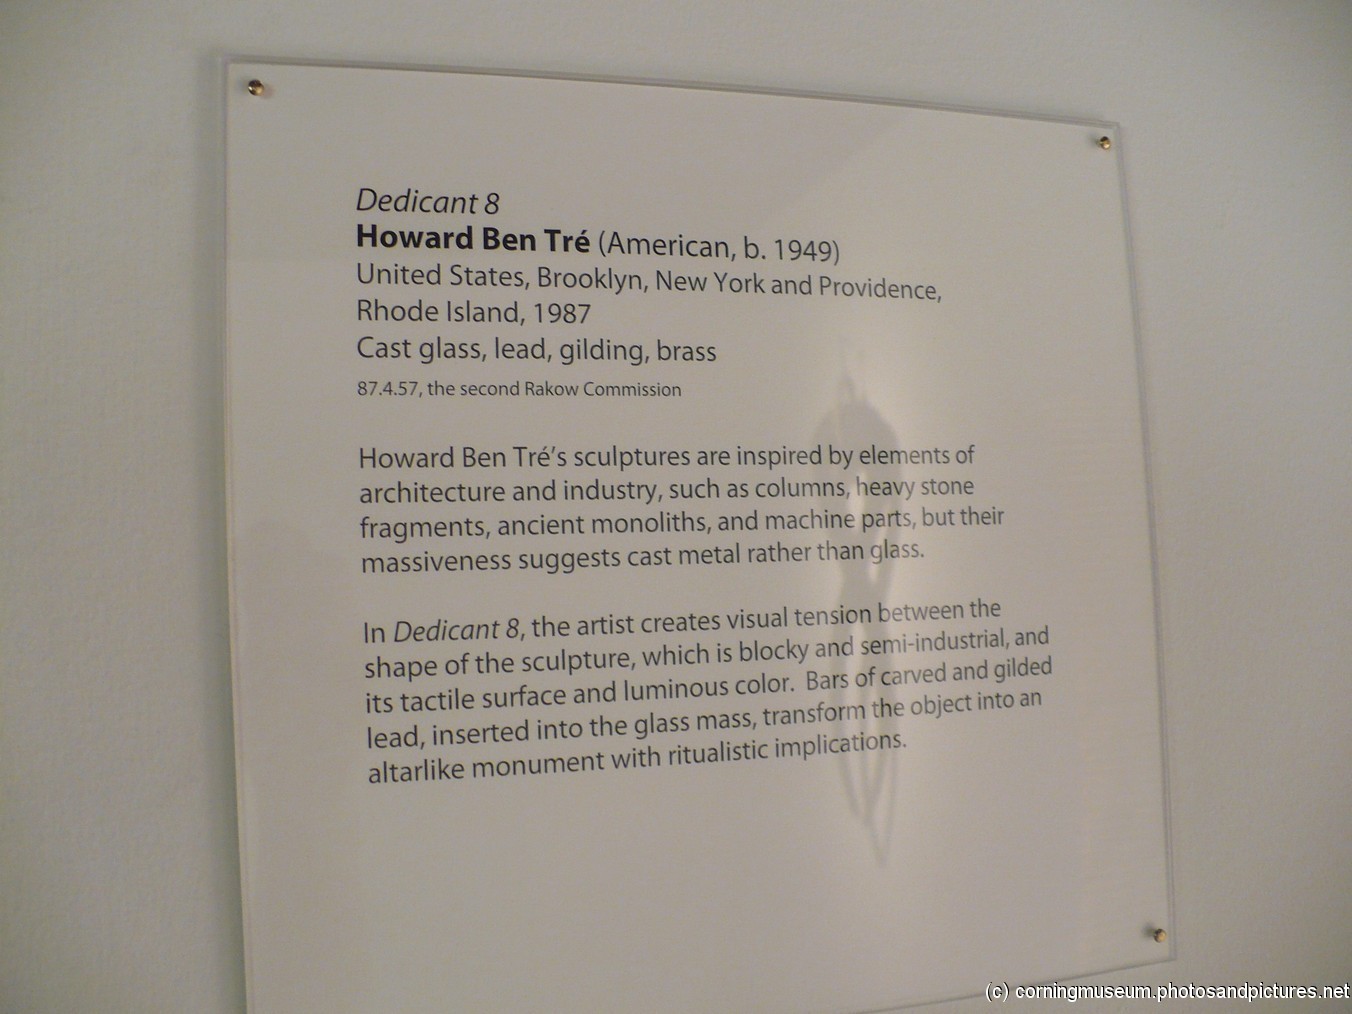 Dedicant 8 by Howard Ben Tre information at Corning Museum of Glass.jpg
